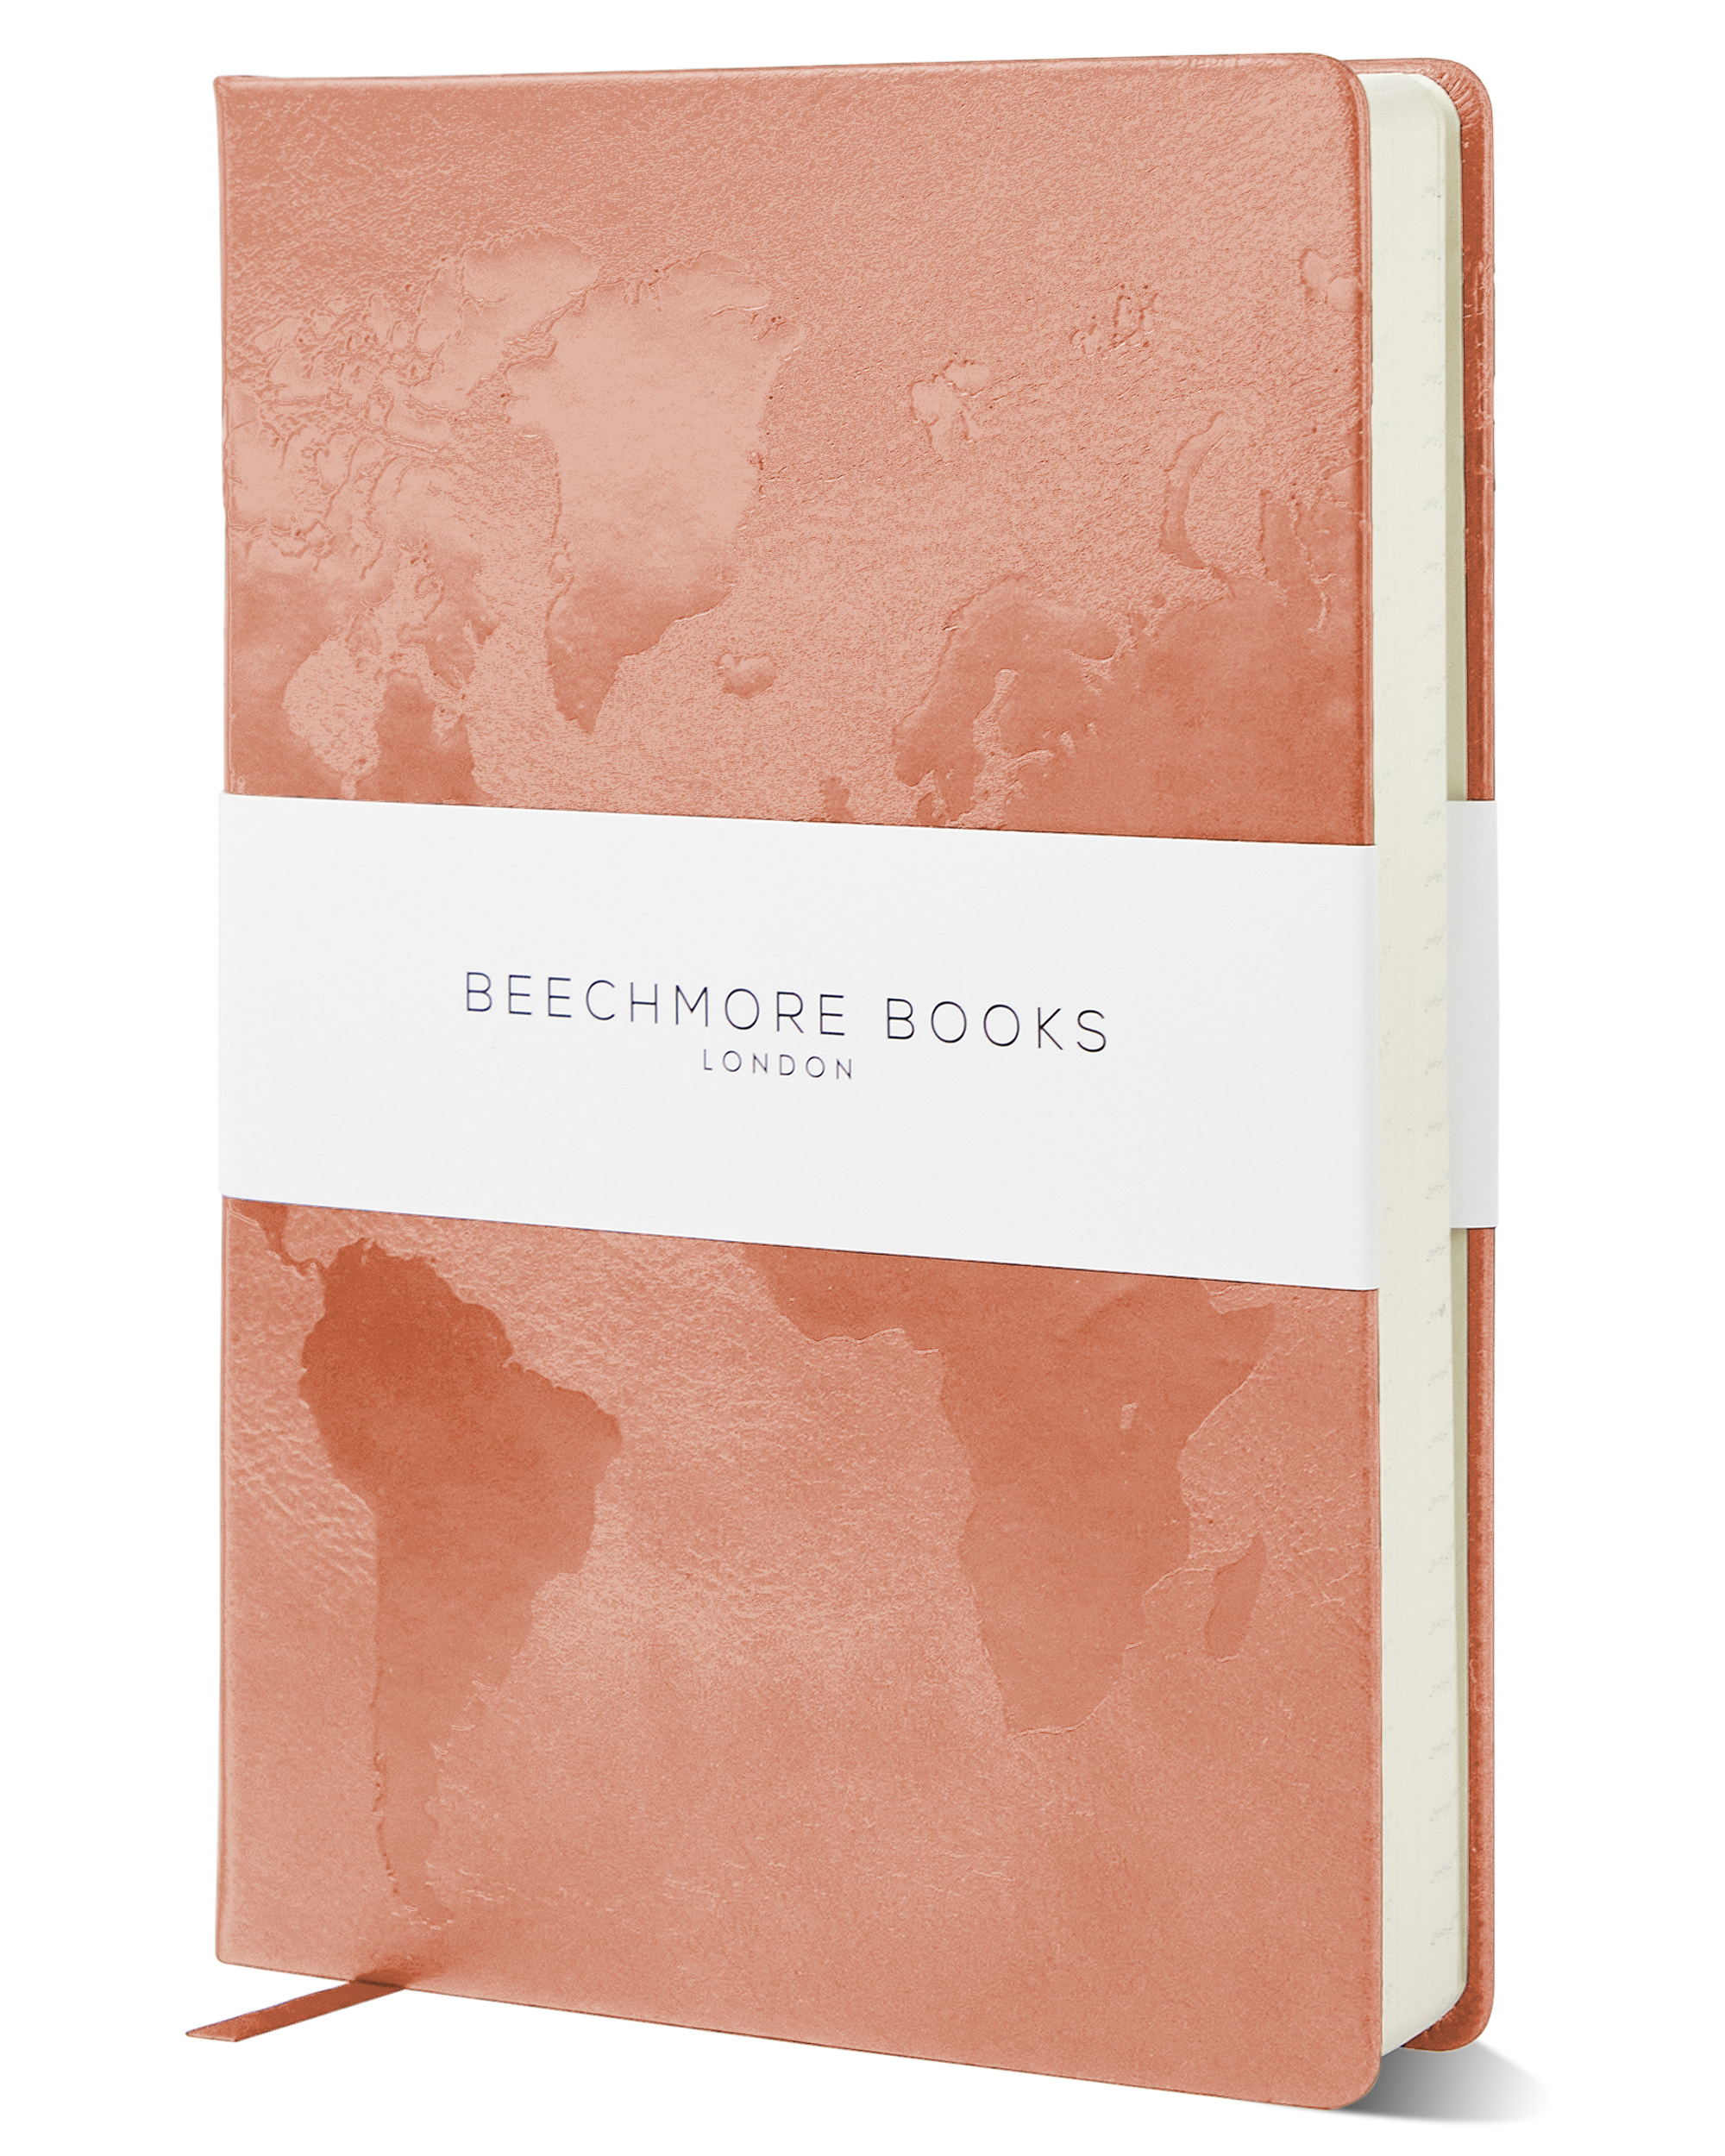 Rose Wood A5 travel planner by Beechmore, infusing your journey planning with the warmth of wood.